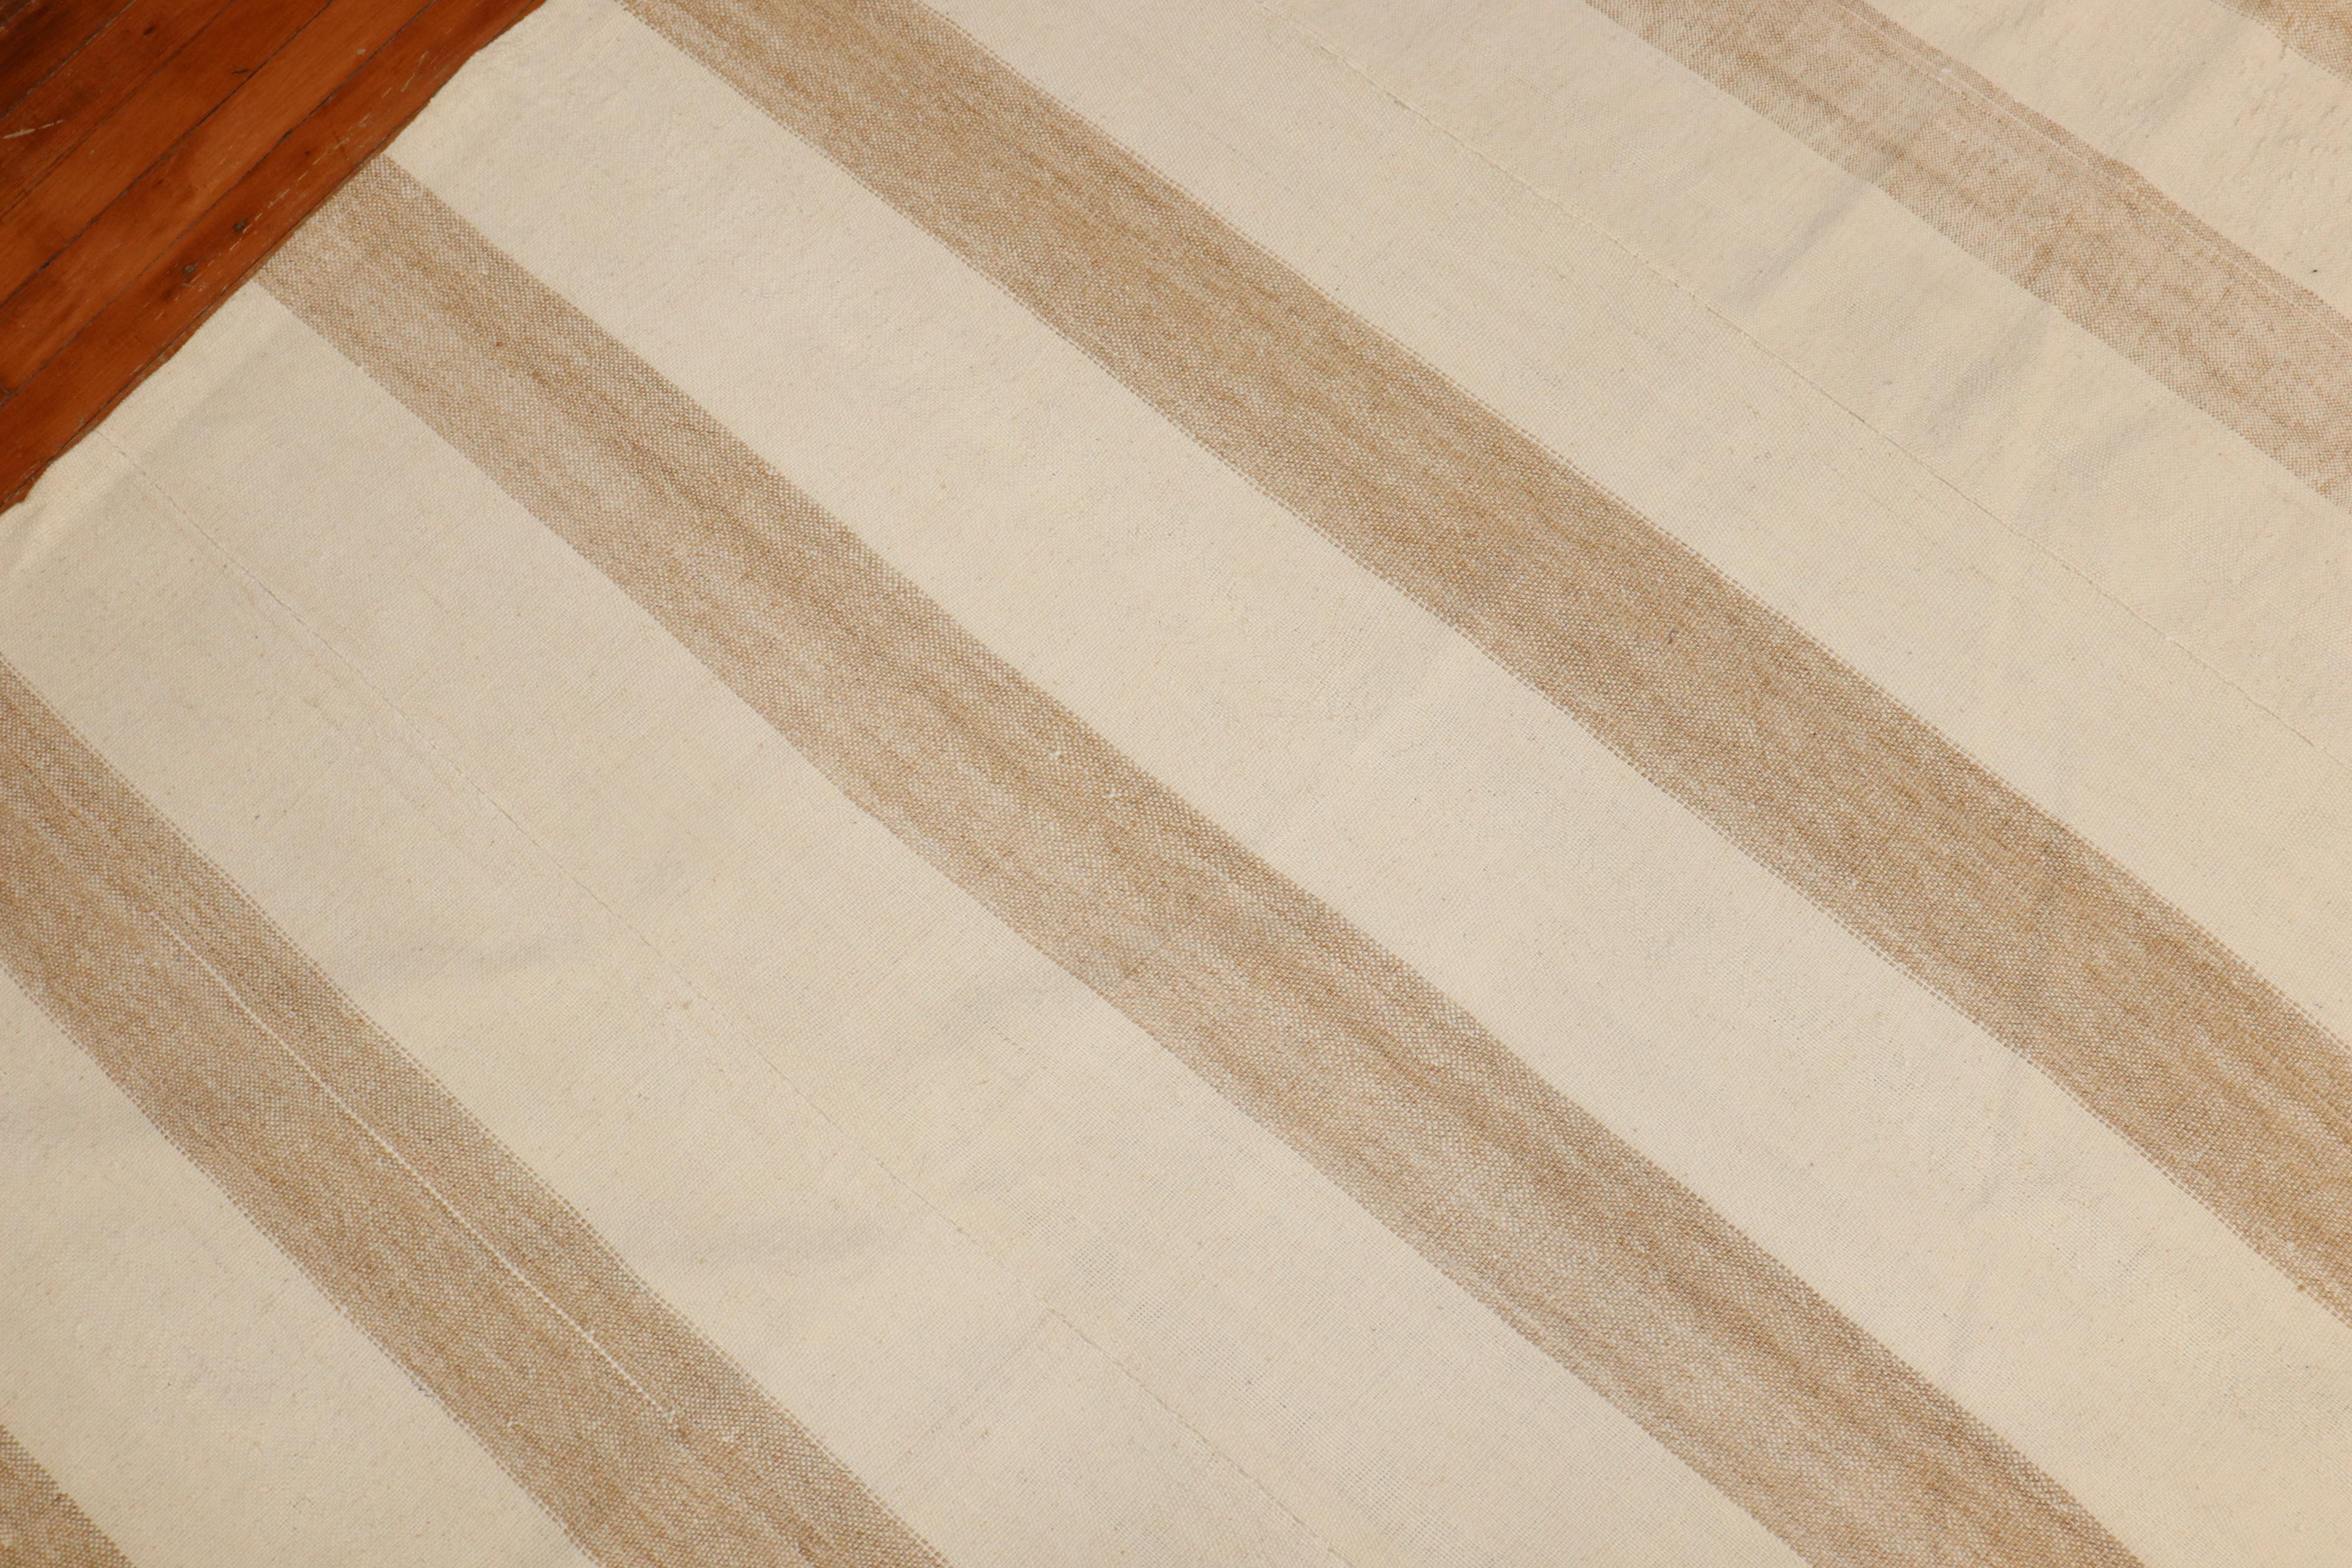 Striped Vintage Inspired Turkish Square Kilim In Good Condition For Sale In New York, NY